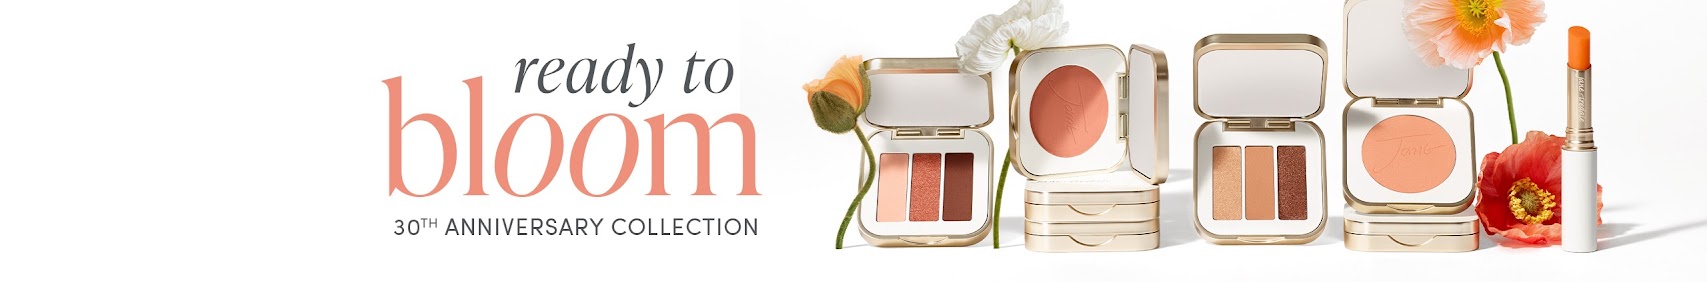 jane iredale ready to the bloom bannière longue